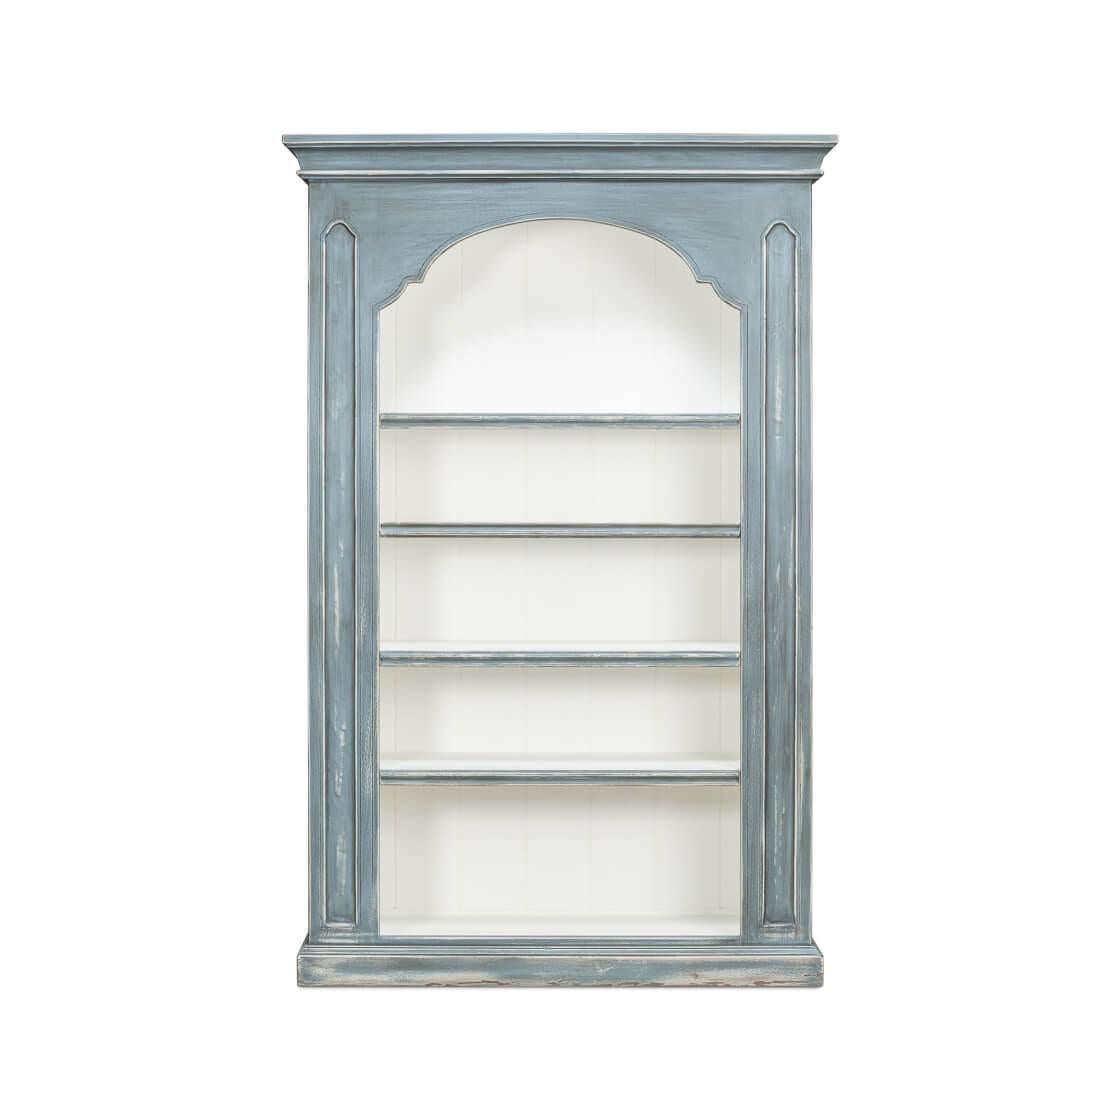 With its calming hues and classic design, reminiscent of a cherished heirloom. The soft blue finish, gently distressed to reveal hints of natural wood, evokes the feel of weathered beachfront shutters.

This bookcase's grand arch crowns its open